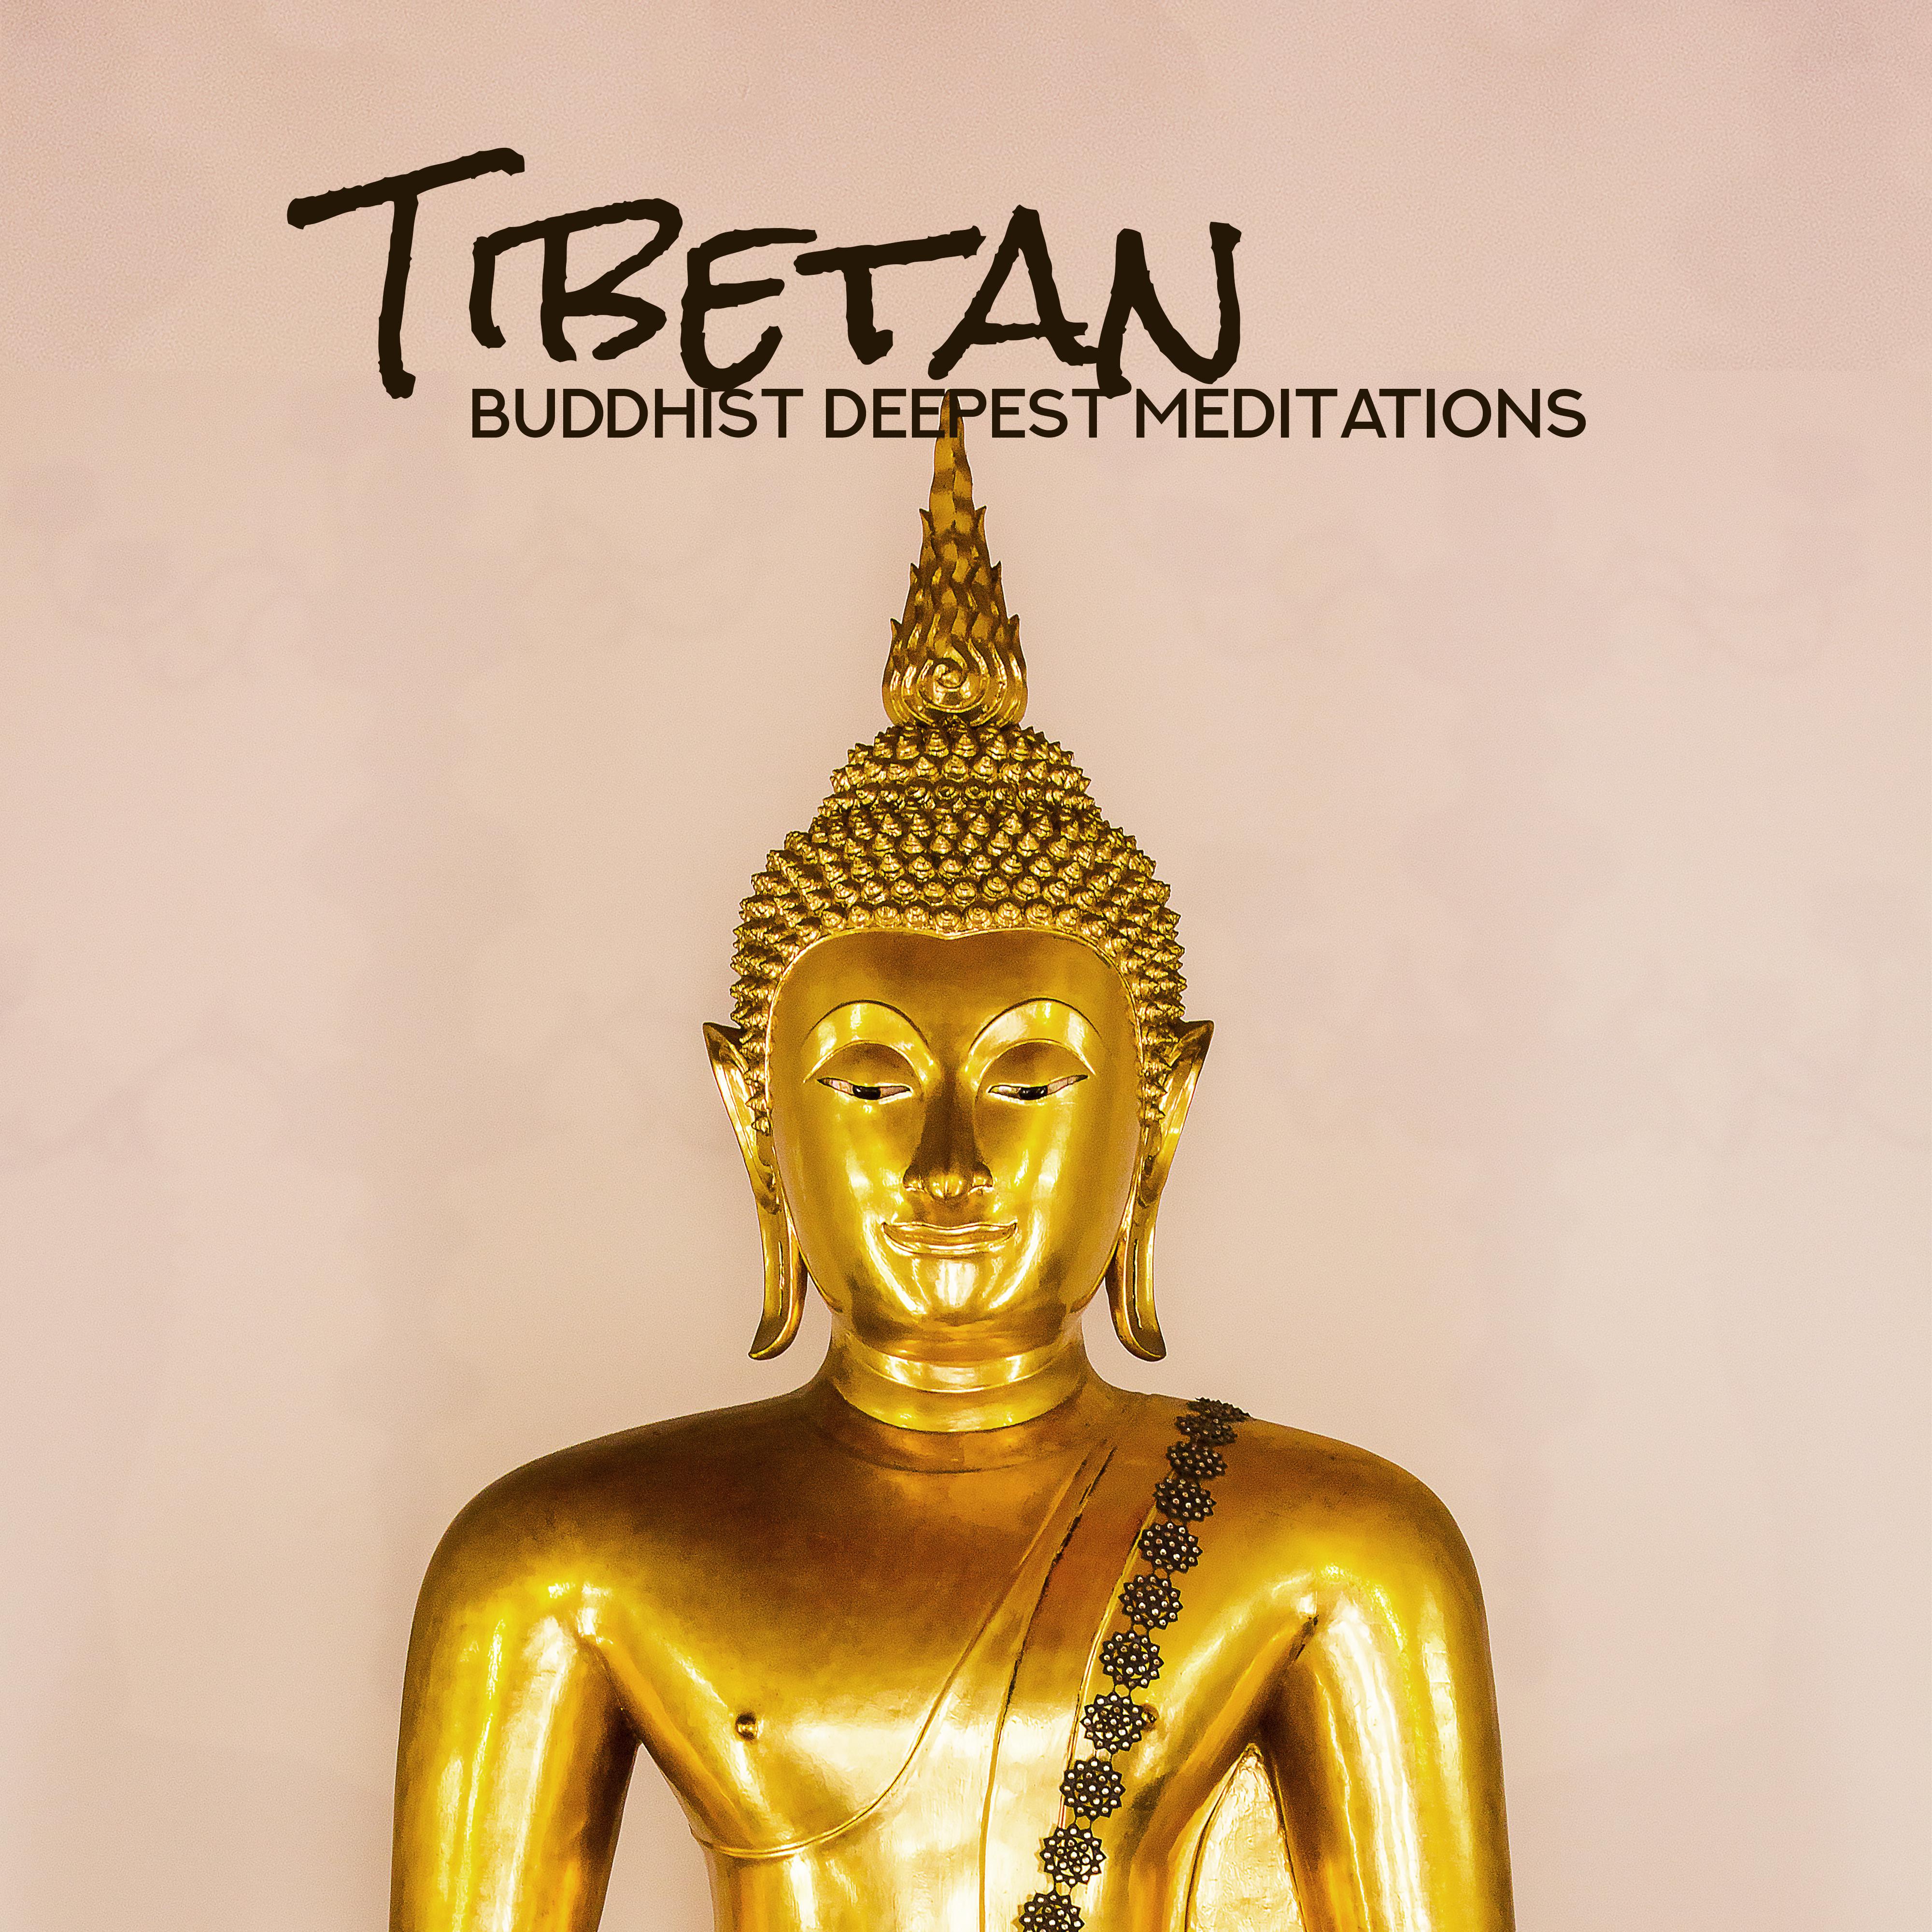 Tibetan Buddhist Deepest Meditations: 2019 New Age Music Compilation for Deep Yoga Contemplation & Mind Relaxation, Ambient, Nature & Oriental Sounds, Increase Your Vital Energy, Heal Chakras & Open Third Eye